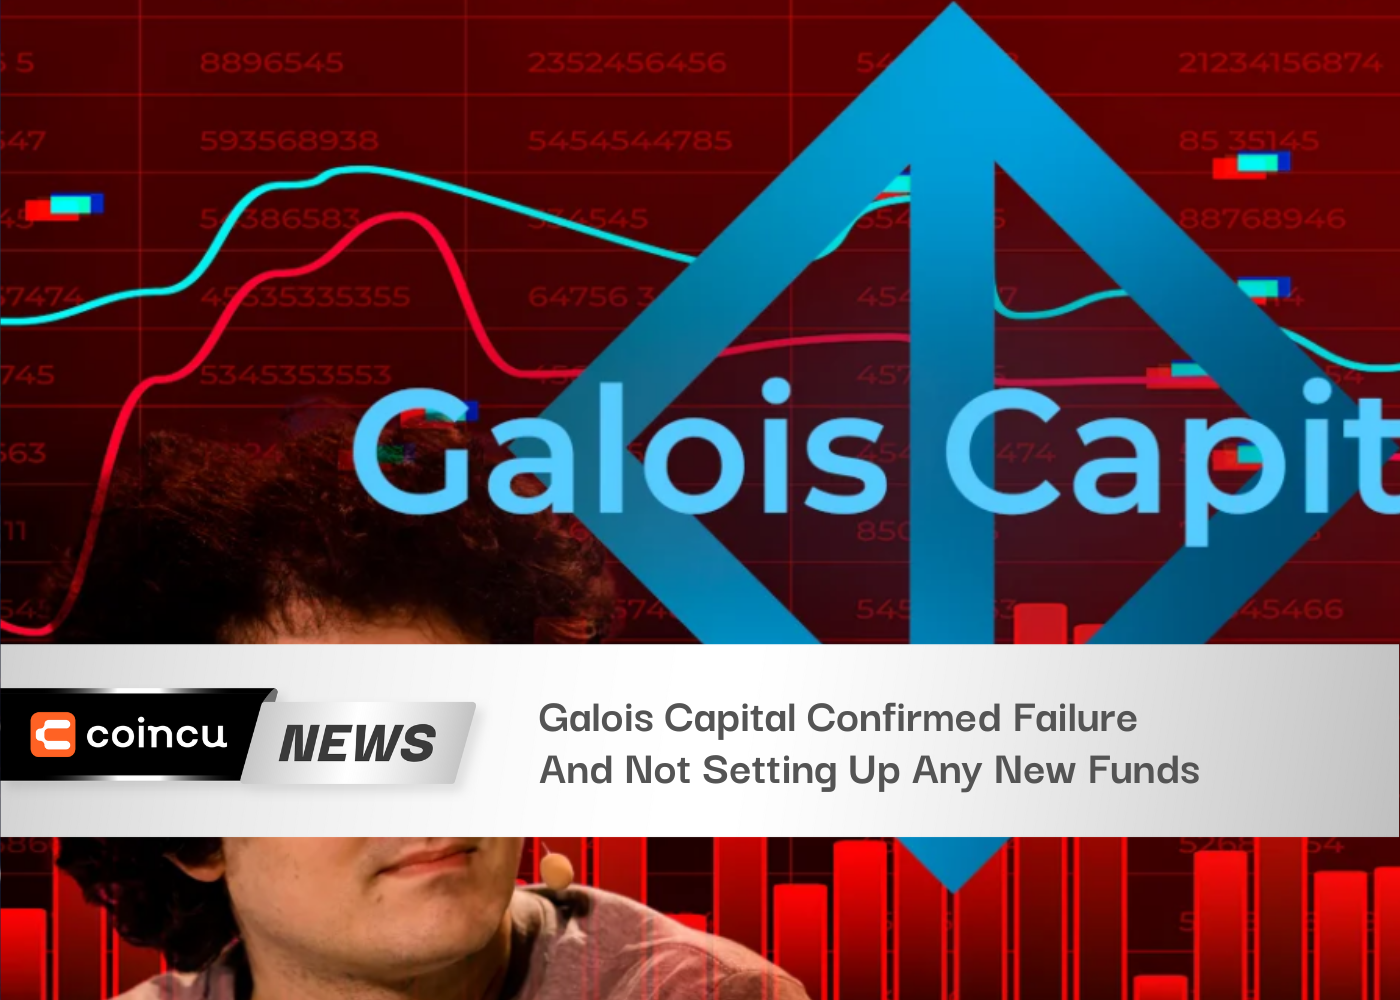 Galois Capital Confirmed Failure And Not Setting Up Any New Funds